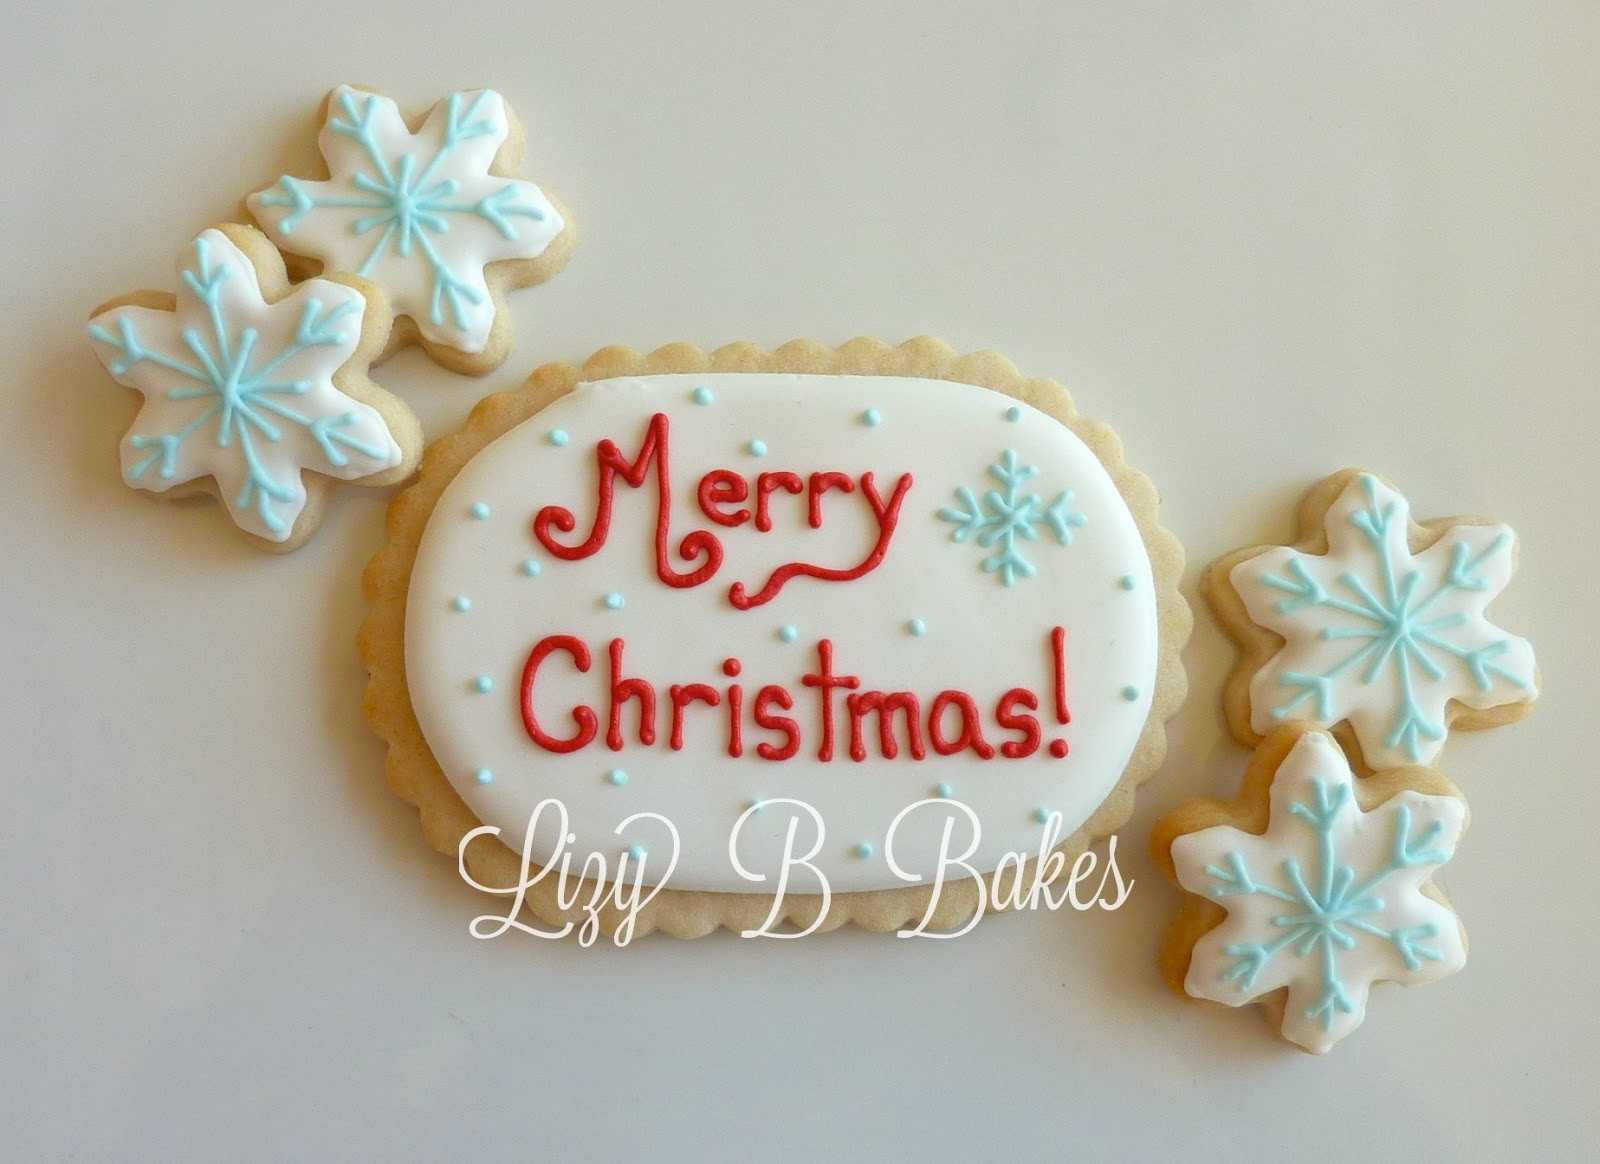 Merry Christmas Cookies
 Lizy B Christmas cookies lly